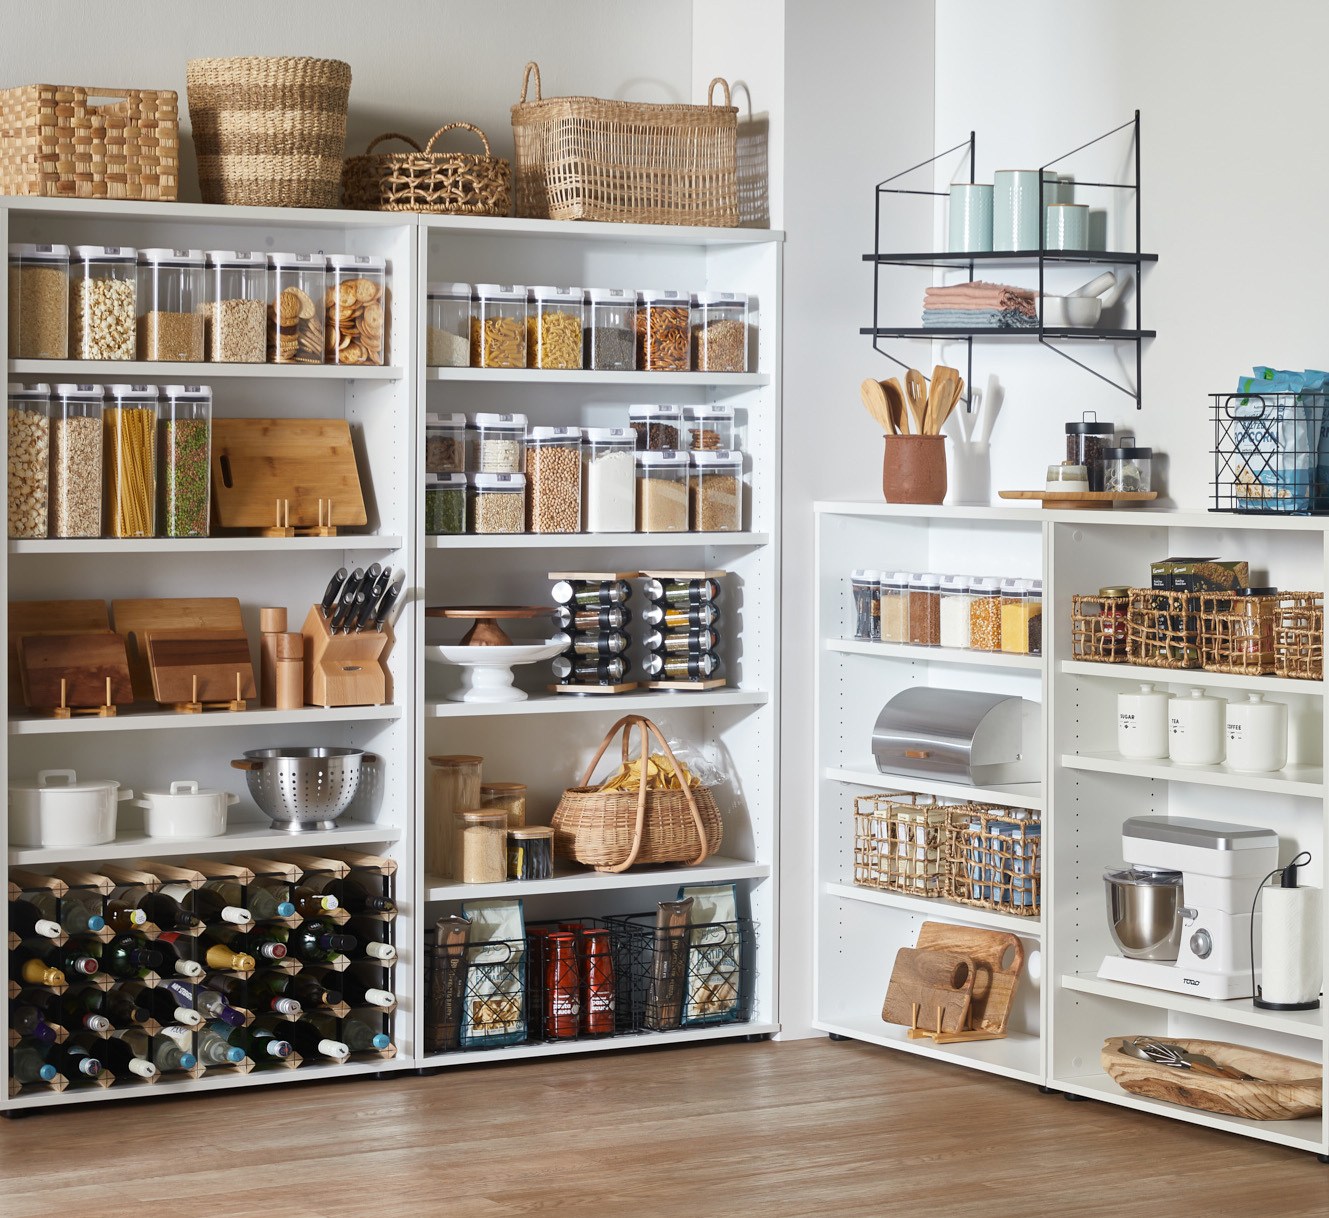 Global Kitchen room ideas. Organised Pantry. By Temple & Webster